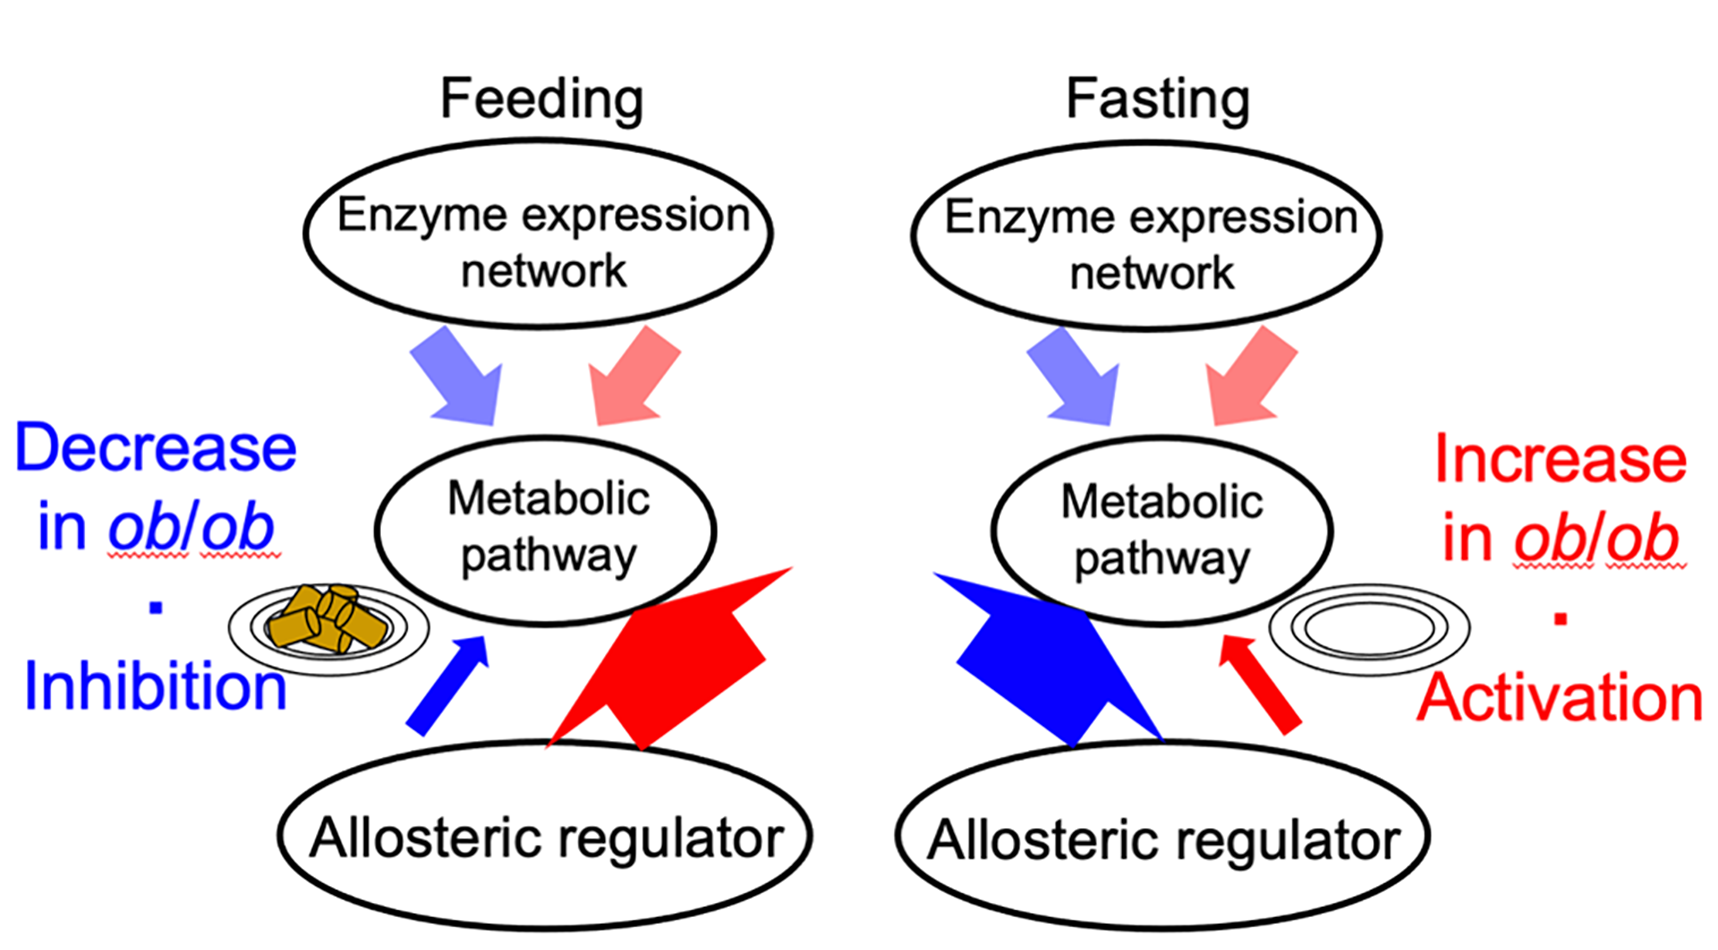 Image explaining the differing allosteric responses.